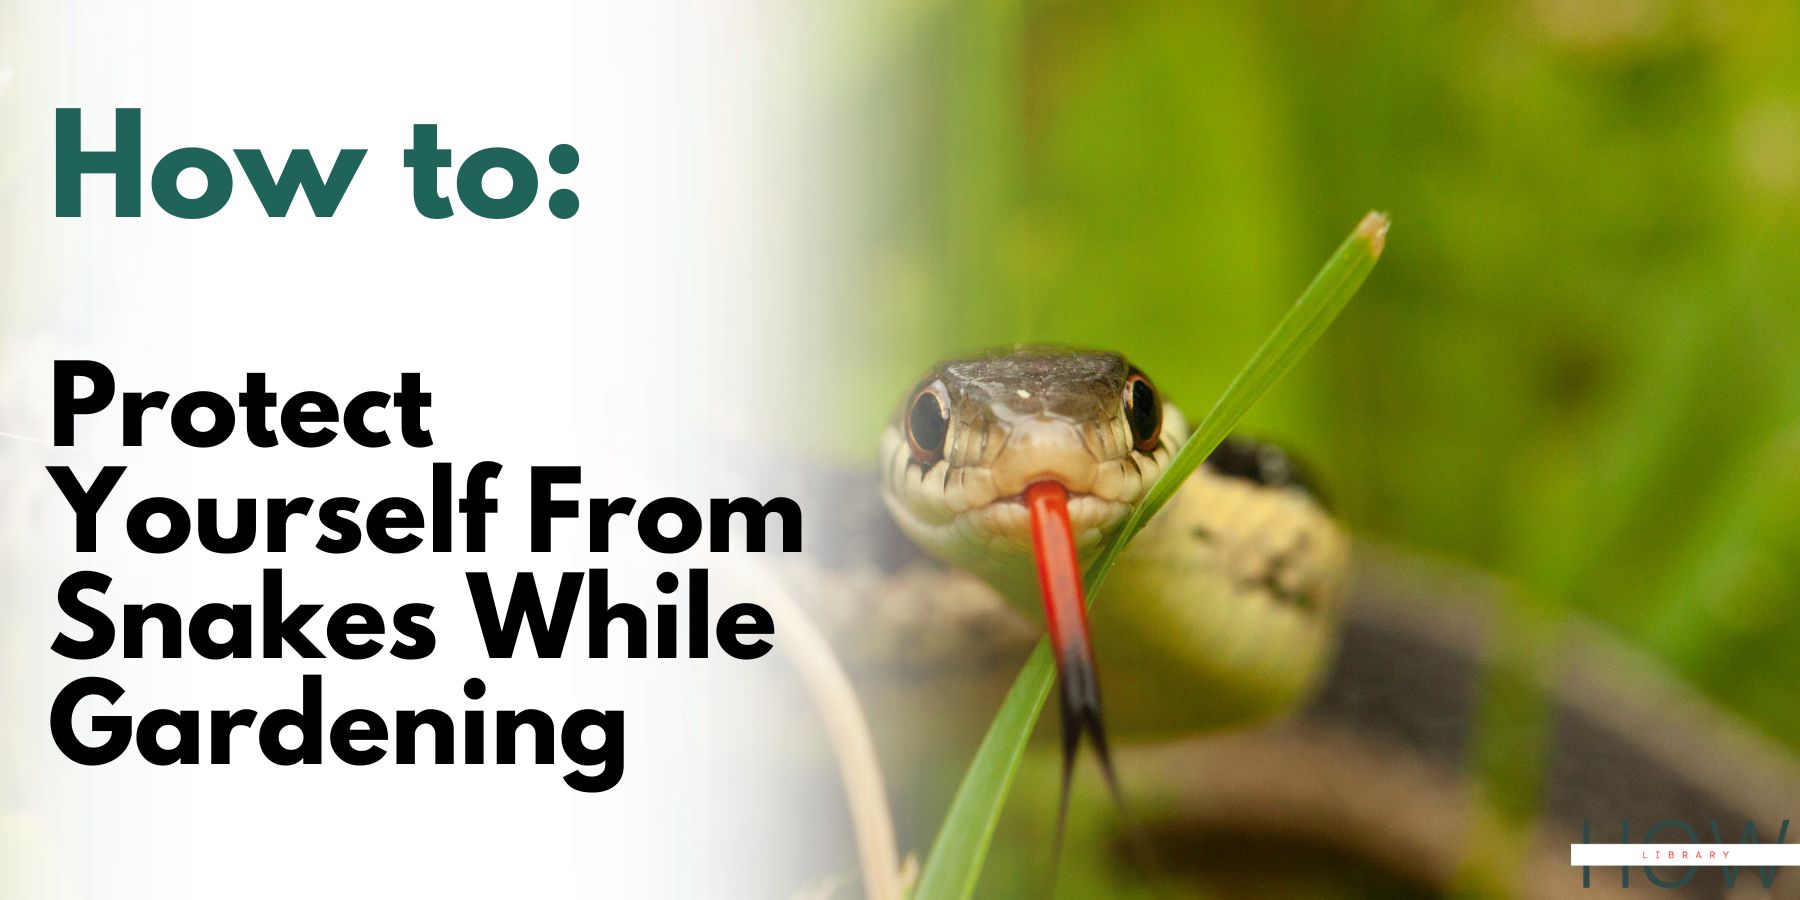 How To Protect Yourself From Snakes While Gardening